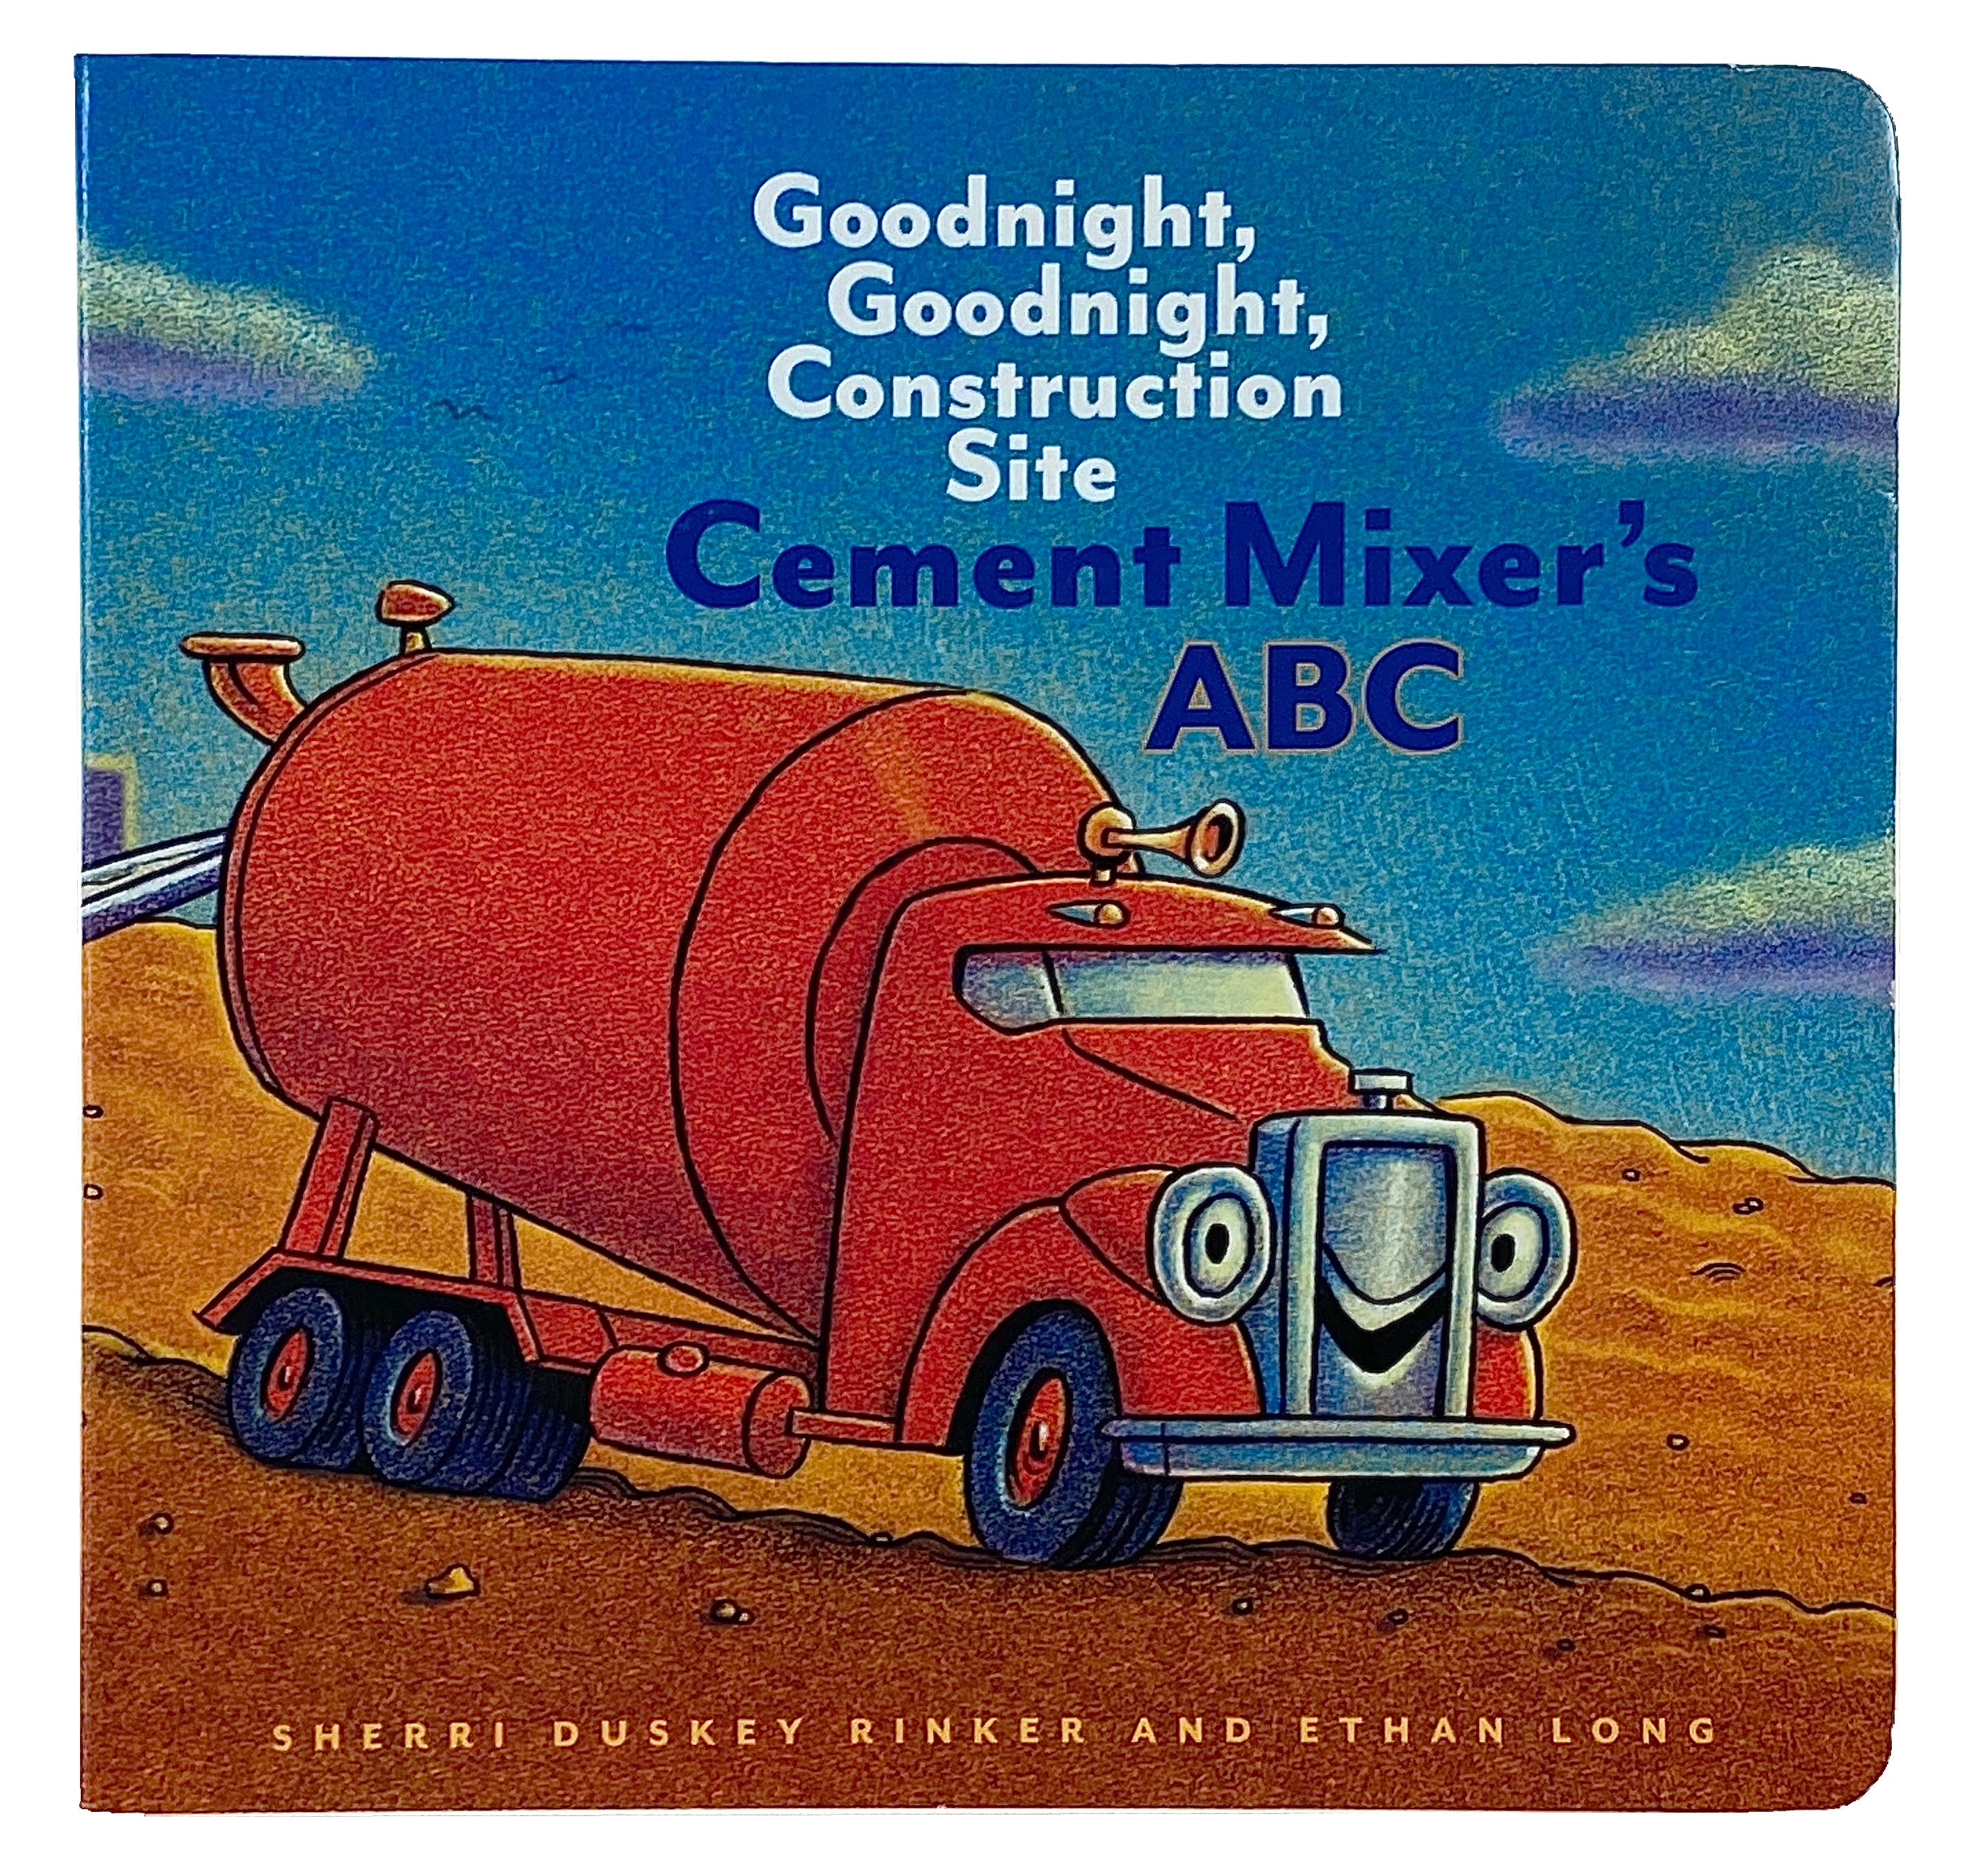 Goodnight, Goodnight, Construction Site Cement Mixer's ABC    